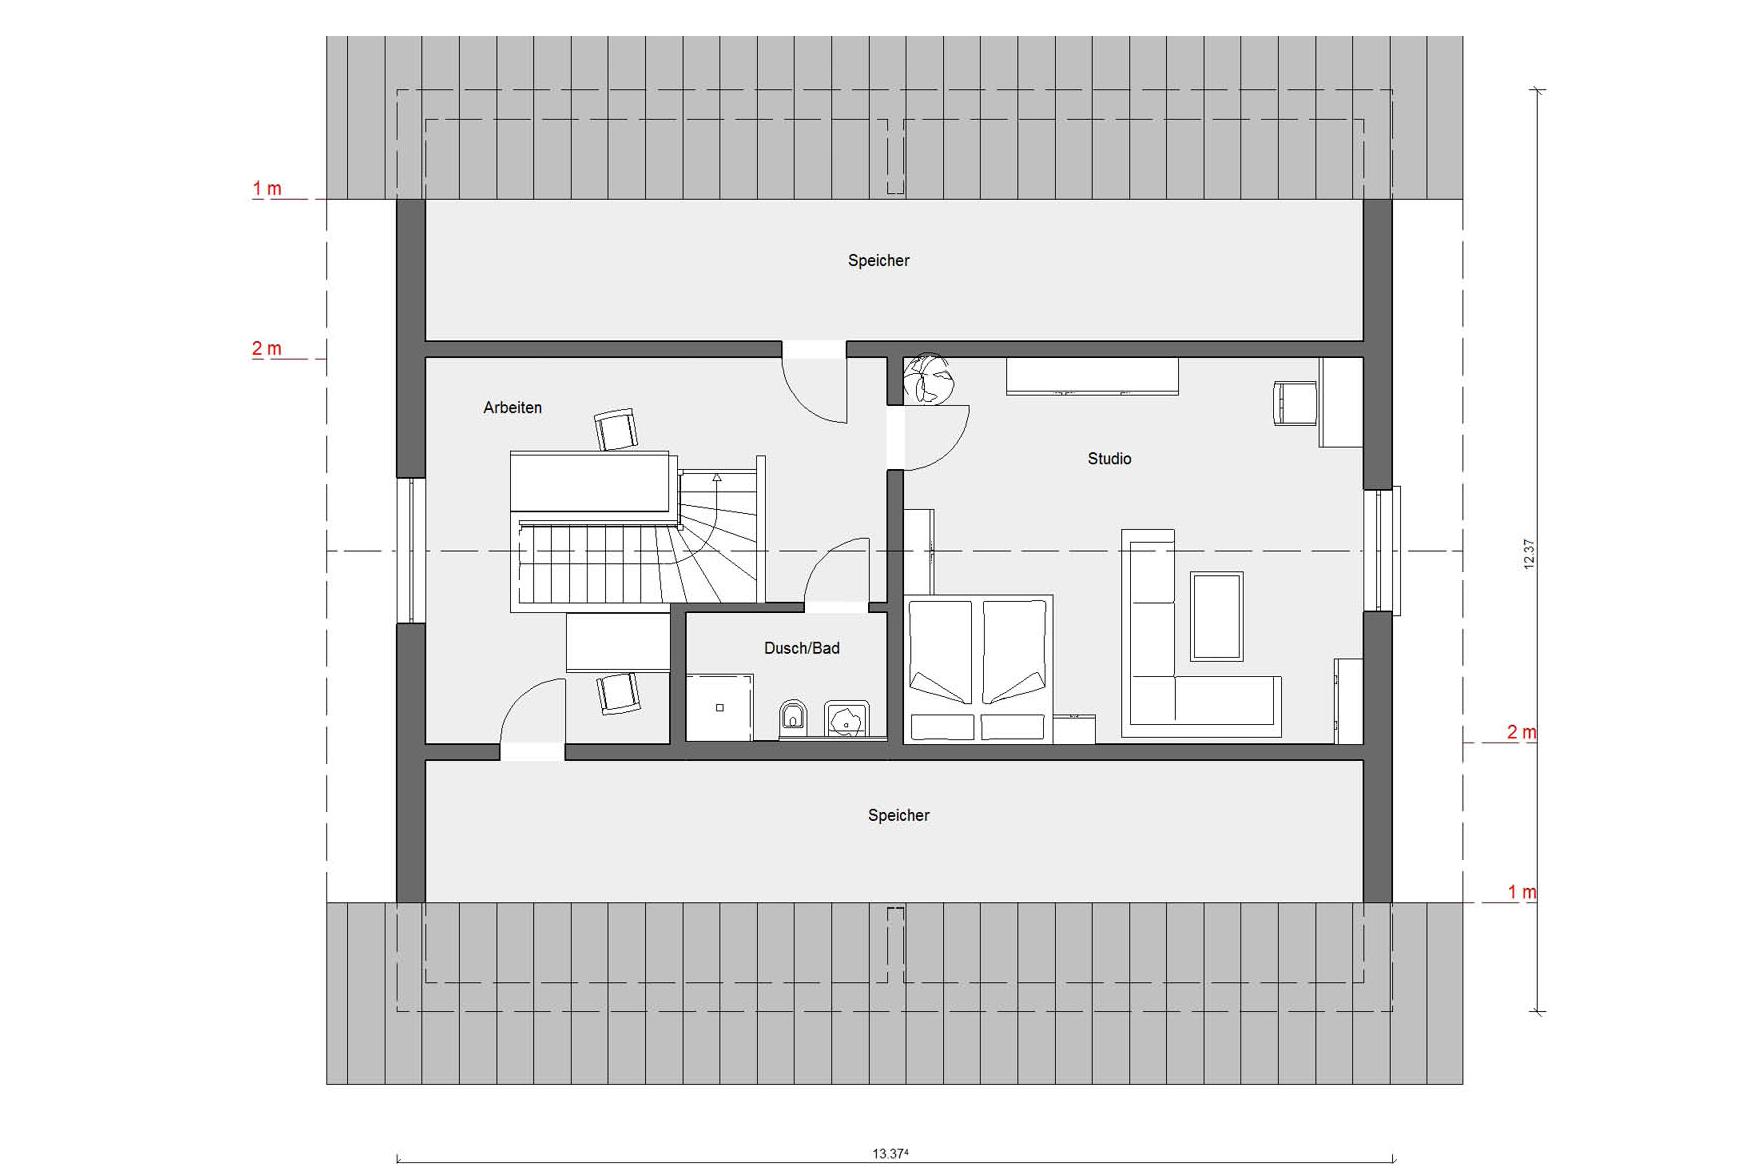 Floor plan penthouse E 15-264.1 Bungalow with pitched roof